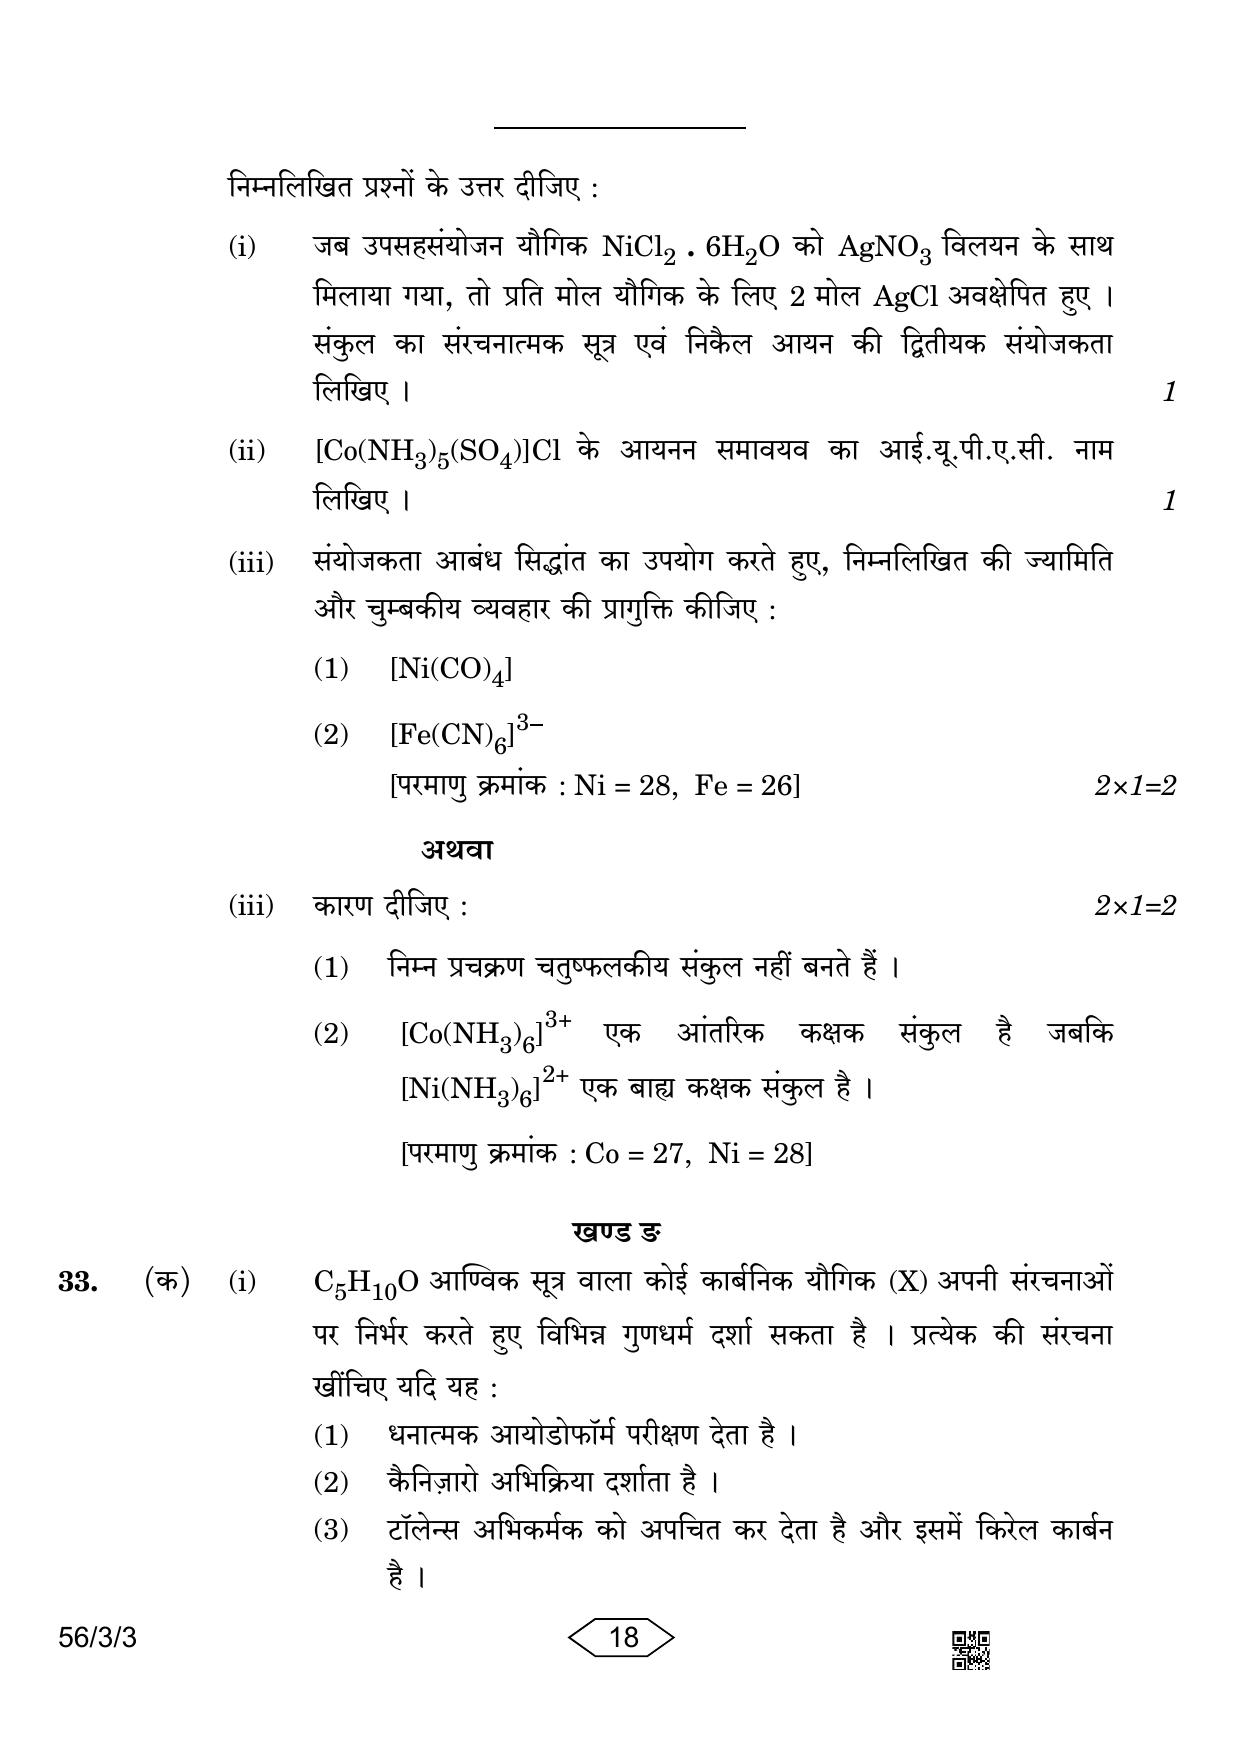 CBSE Class 12 56-3-3 Chemistry 2023 Question Paper - Page 18